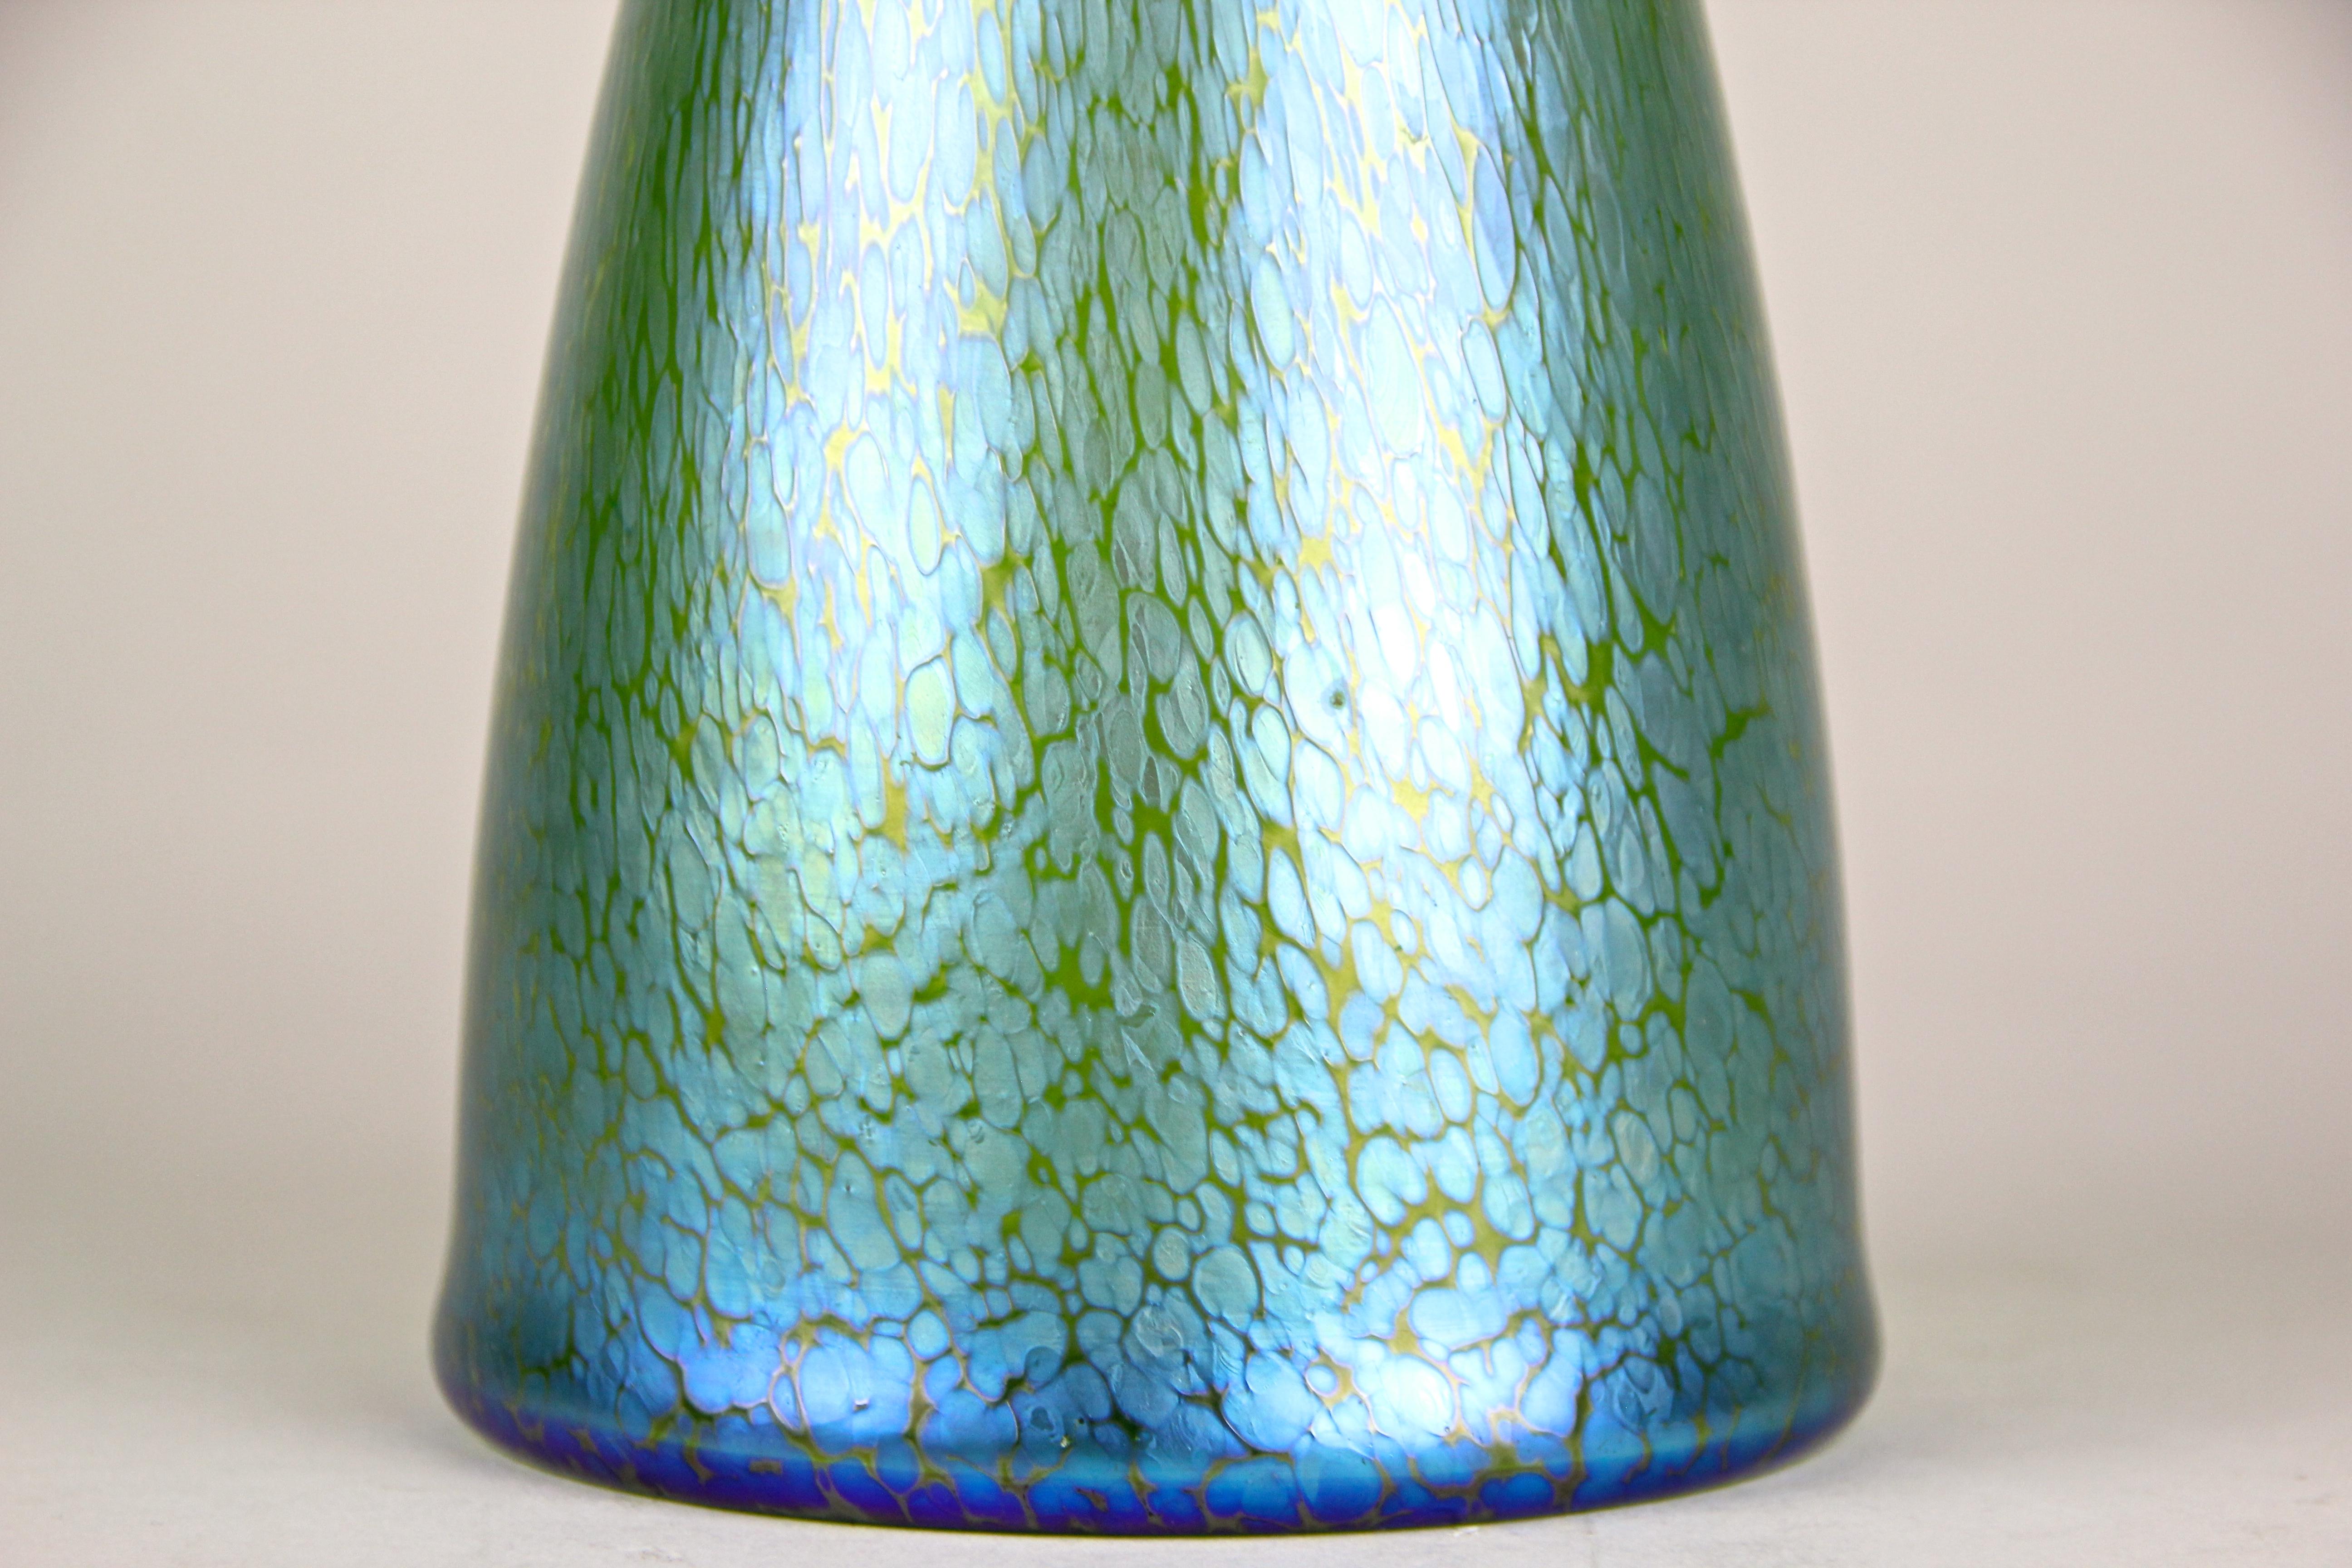 Stunning Loetz glass vase by Koloman Moser for E. Bakalowits made in Klostermuehle/ Bohemia, circa 1899. This rare Bohemian glass vase was designed by none other than world-famous Austrian artisans Koloman Moser, especially for E. Bakalowits. The